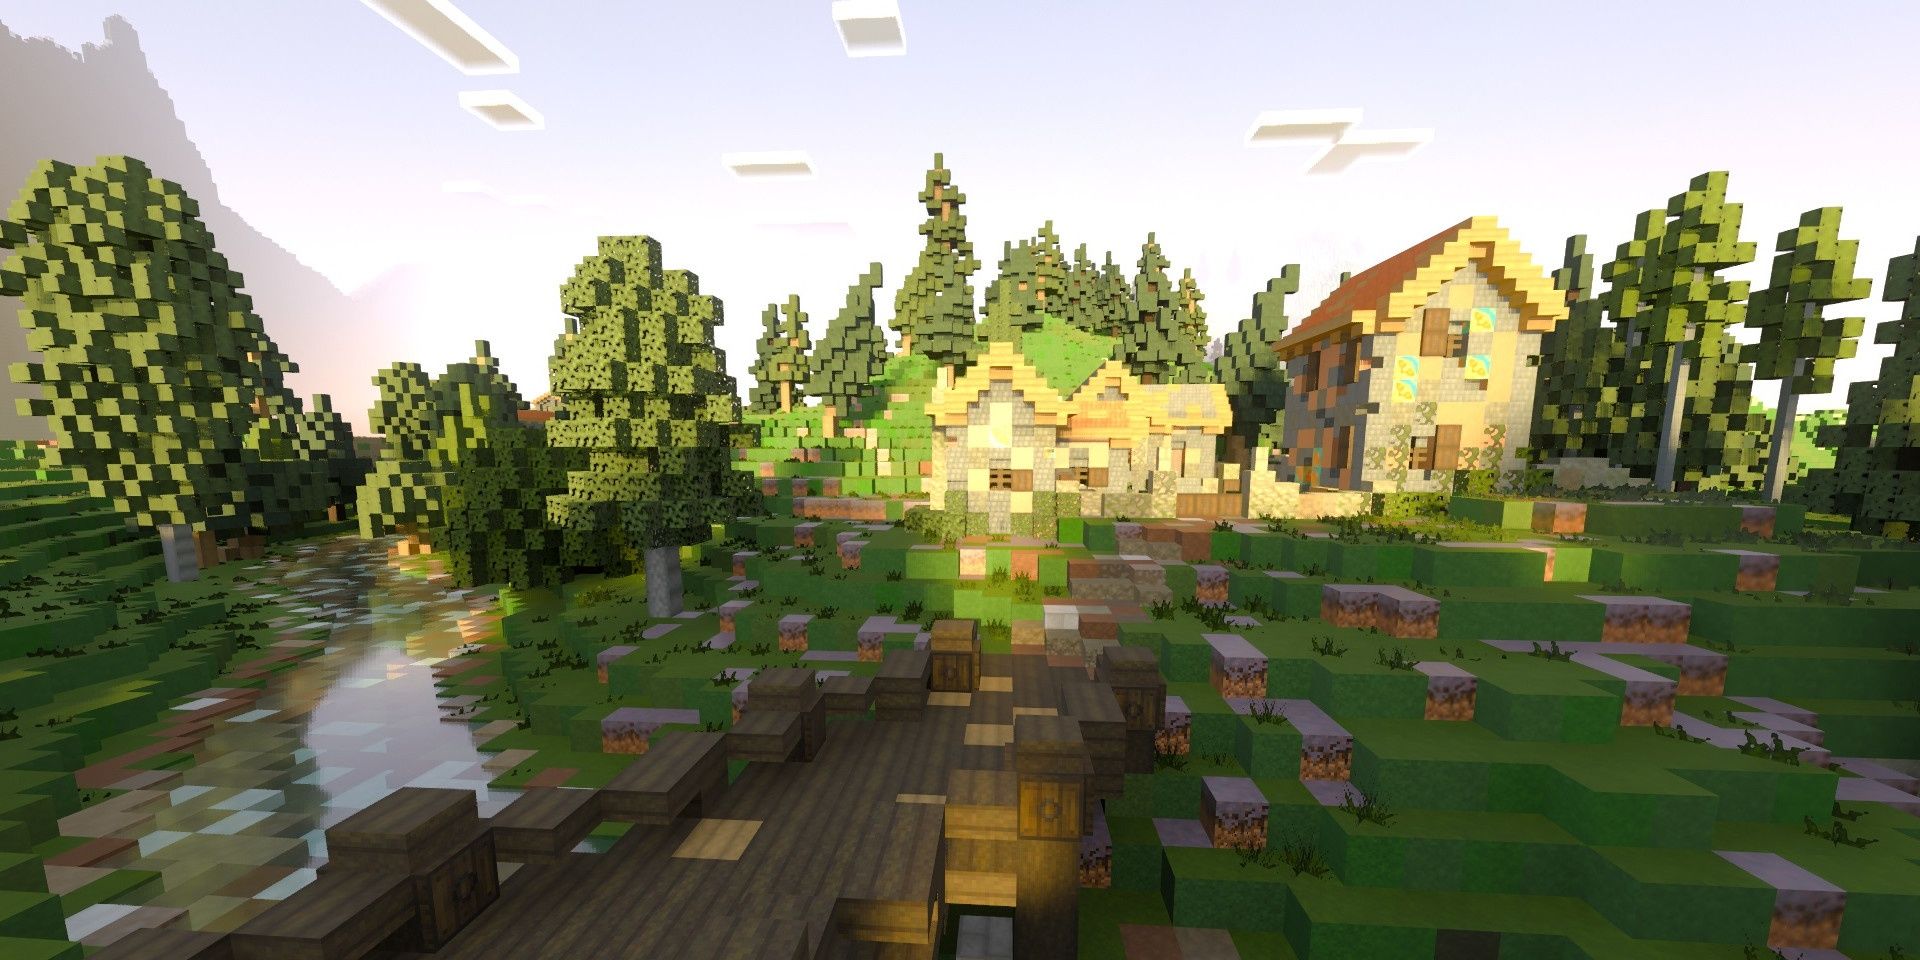 A screenshot showing scenery in Minecraft with RTX for Windows 10